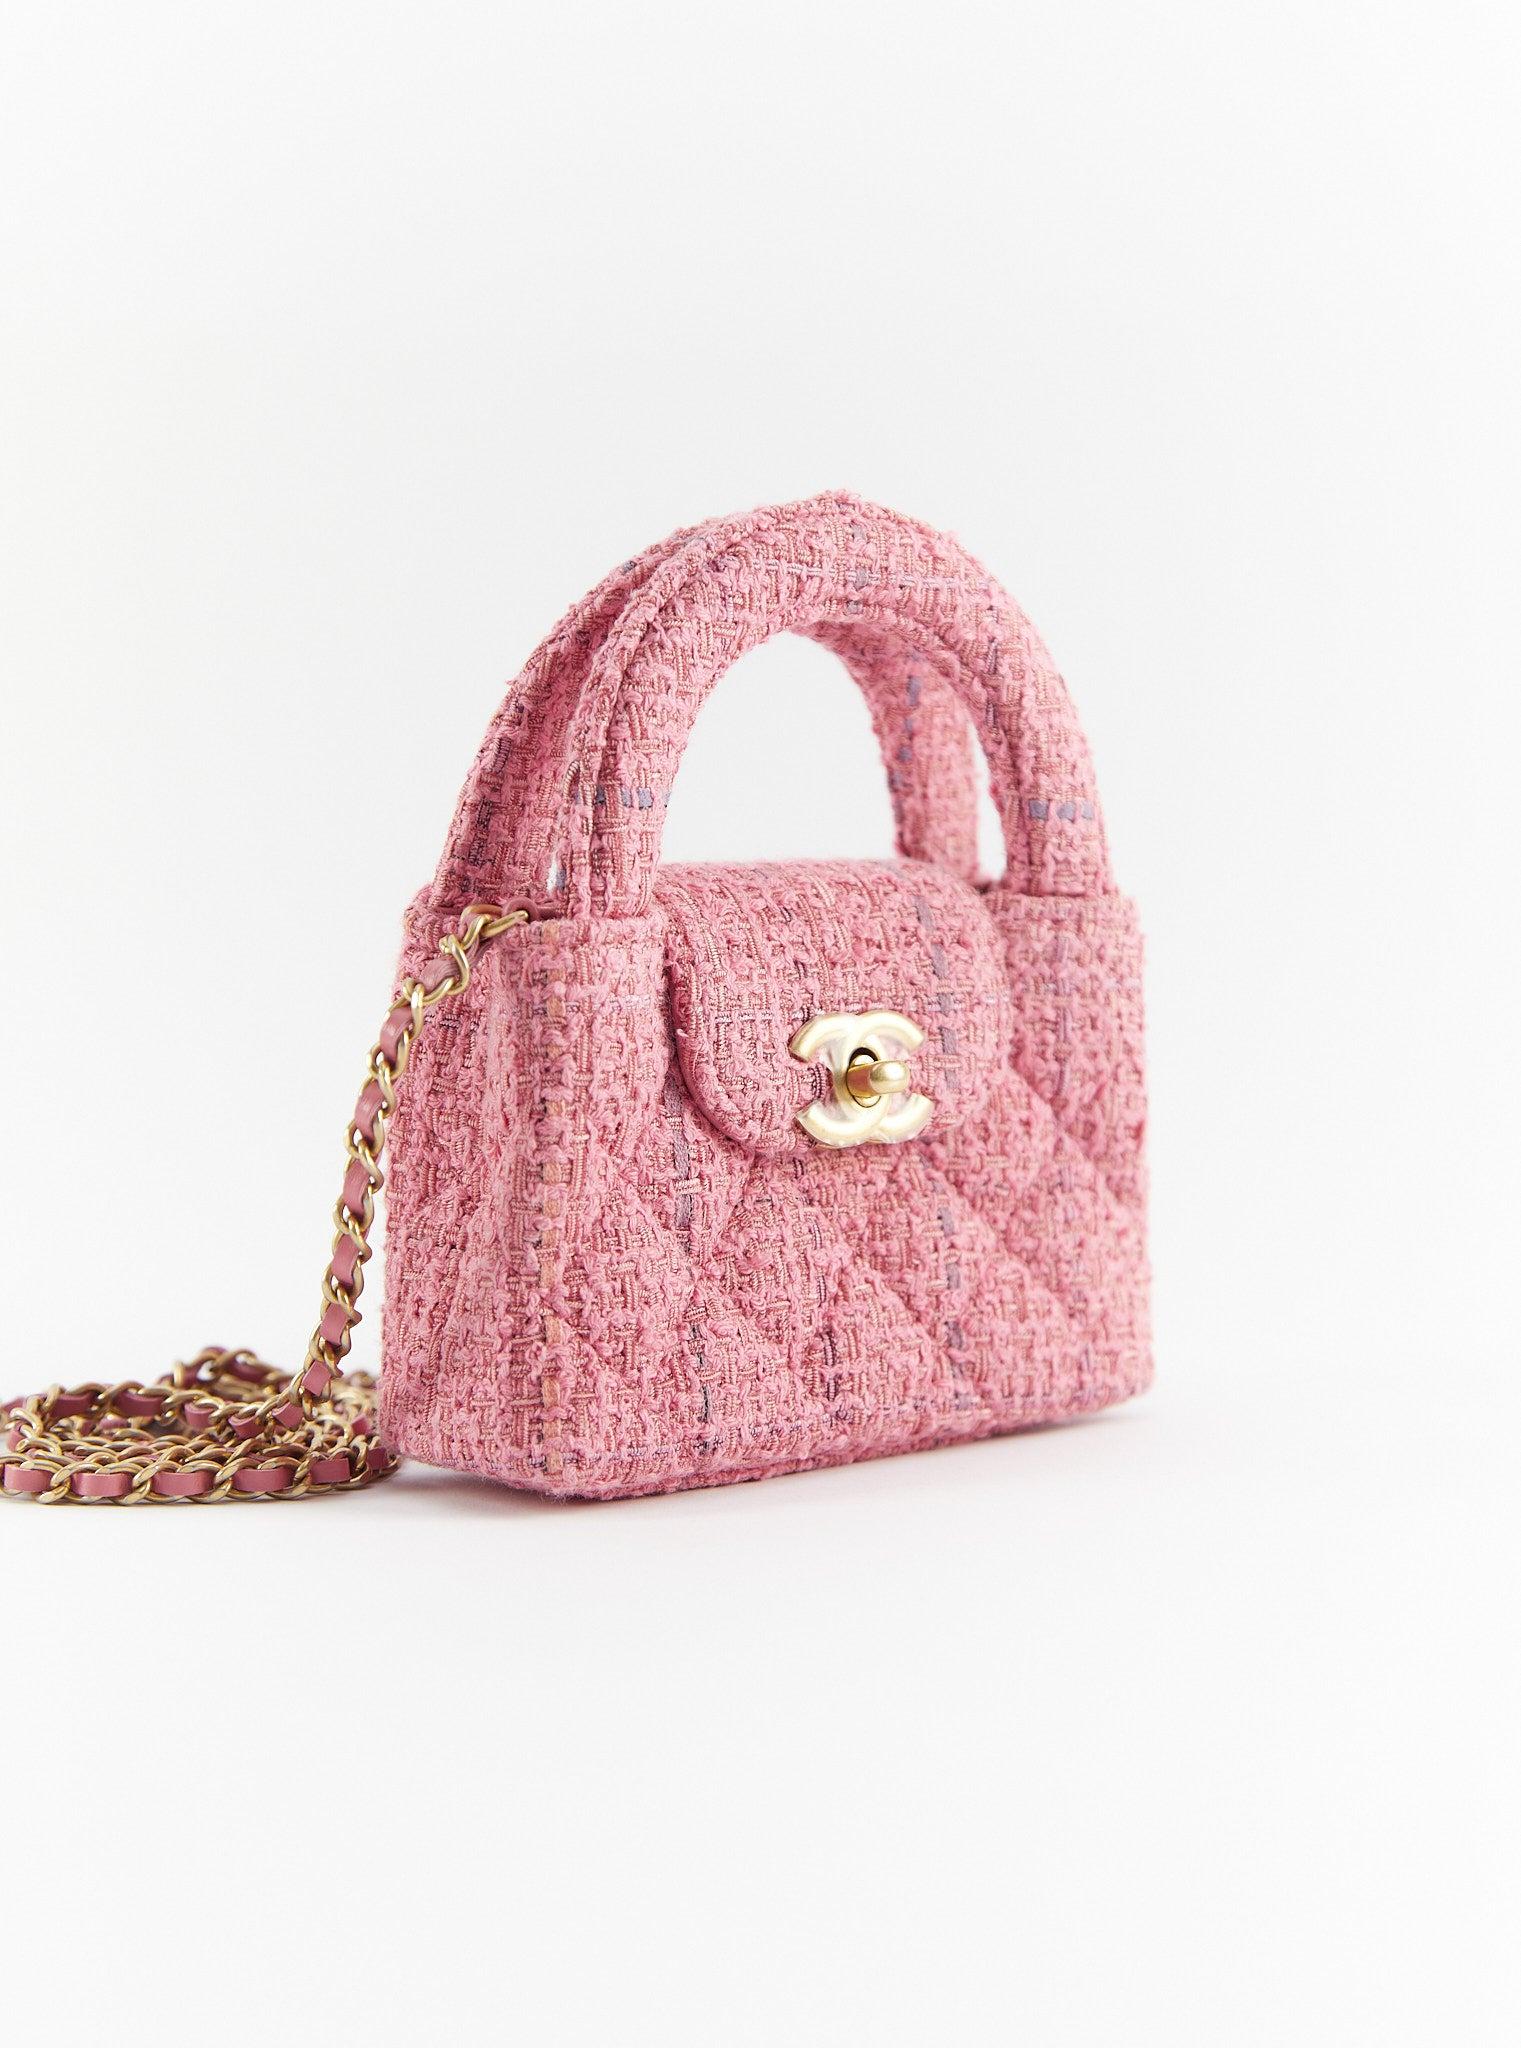 Chanel Nano Kelly Bag in Pink

Tweed with Gold-Tone Hardware

Accompanied by: Chanel Box, Dustbag & Authenticity Chip

Dimensions: H 12.5 x W 8.3 x D 4cm